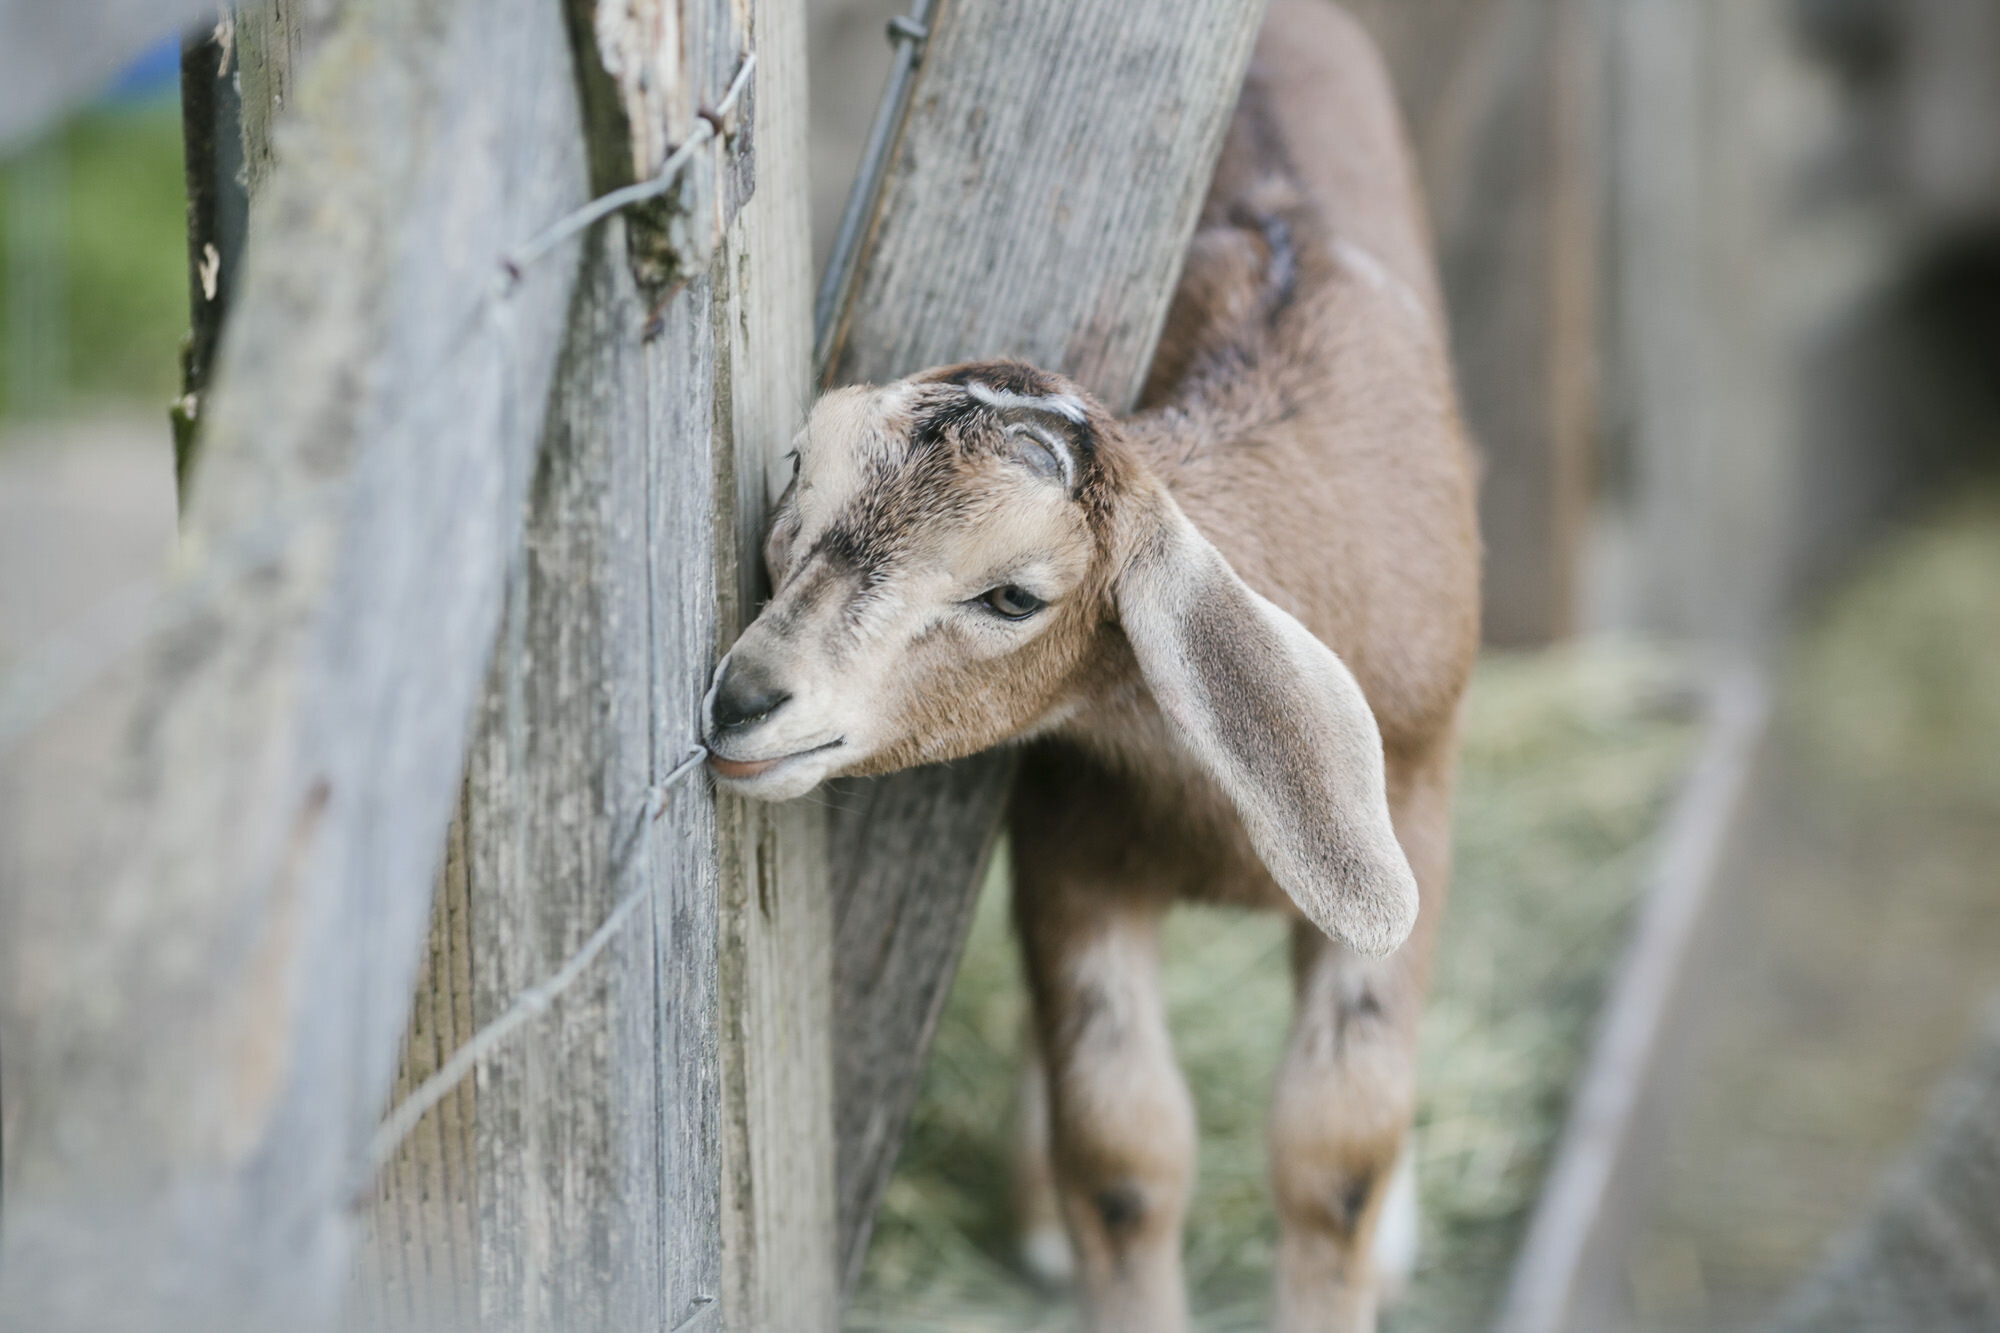 Baby goat at Slide Ranch in Marin during engagement session